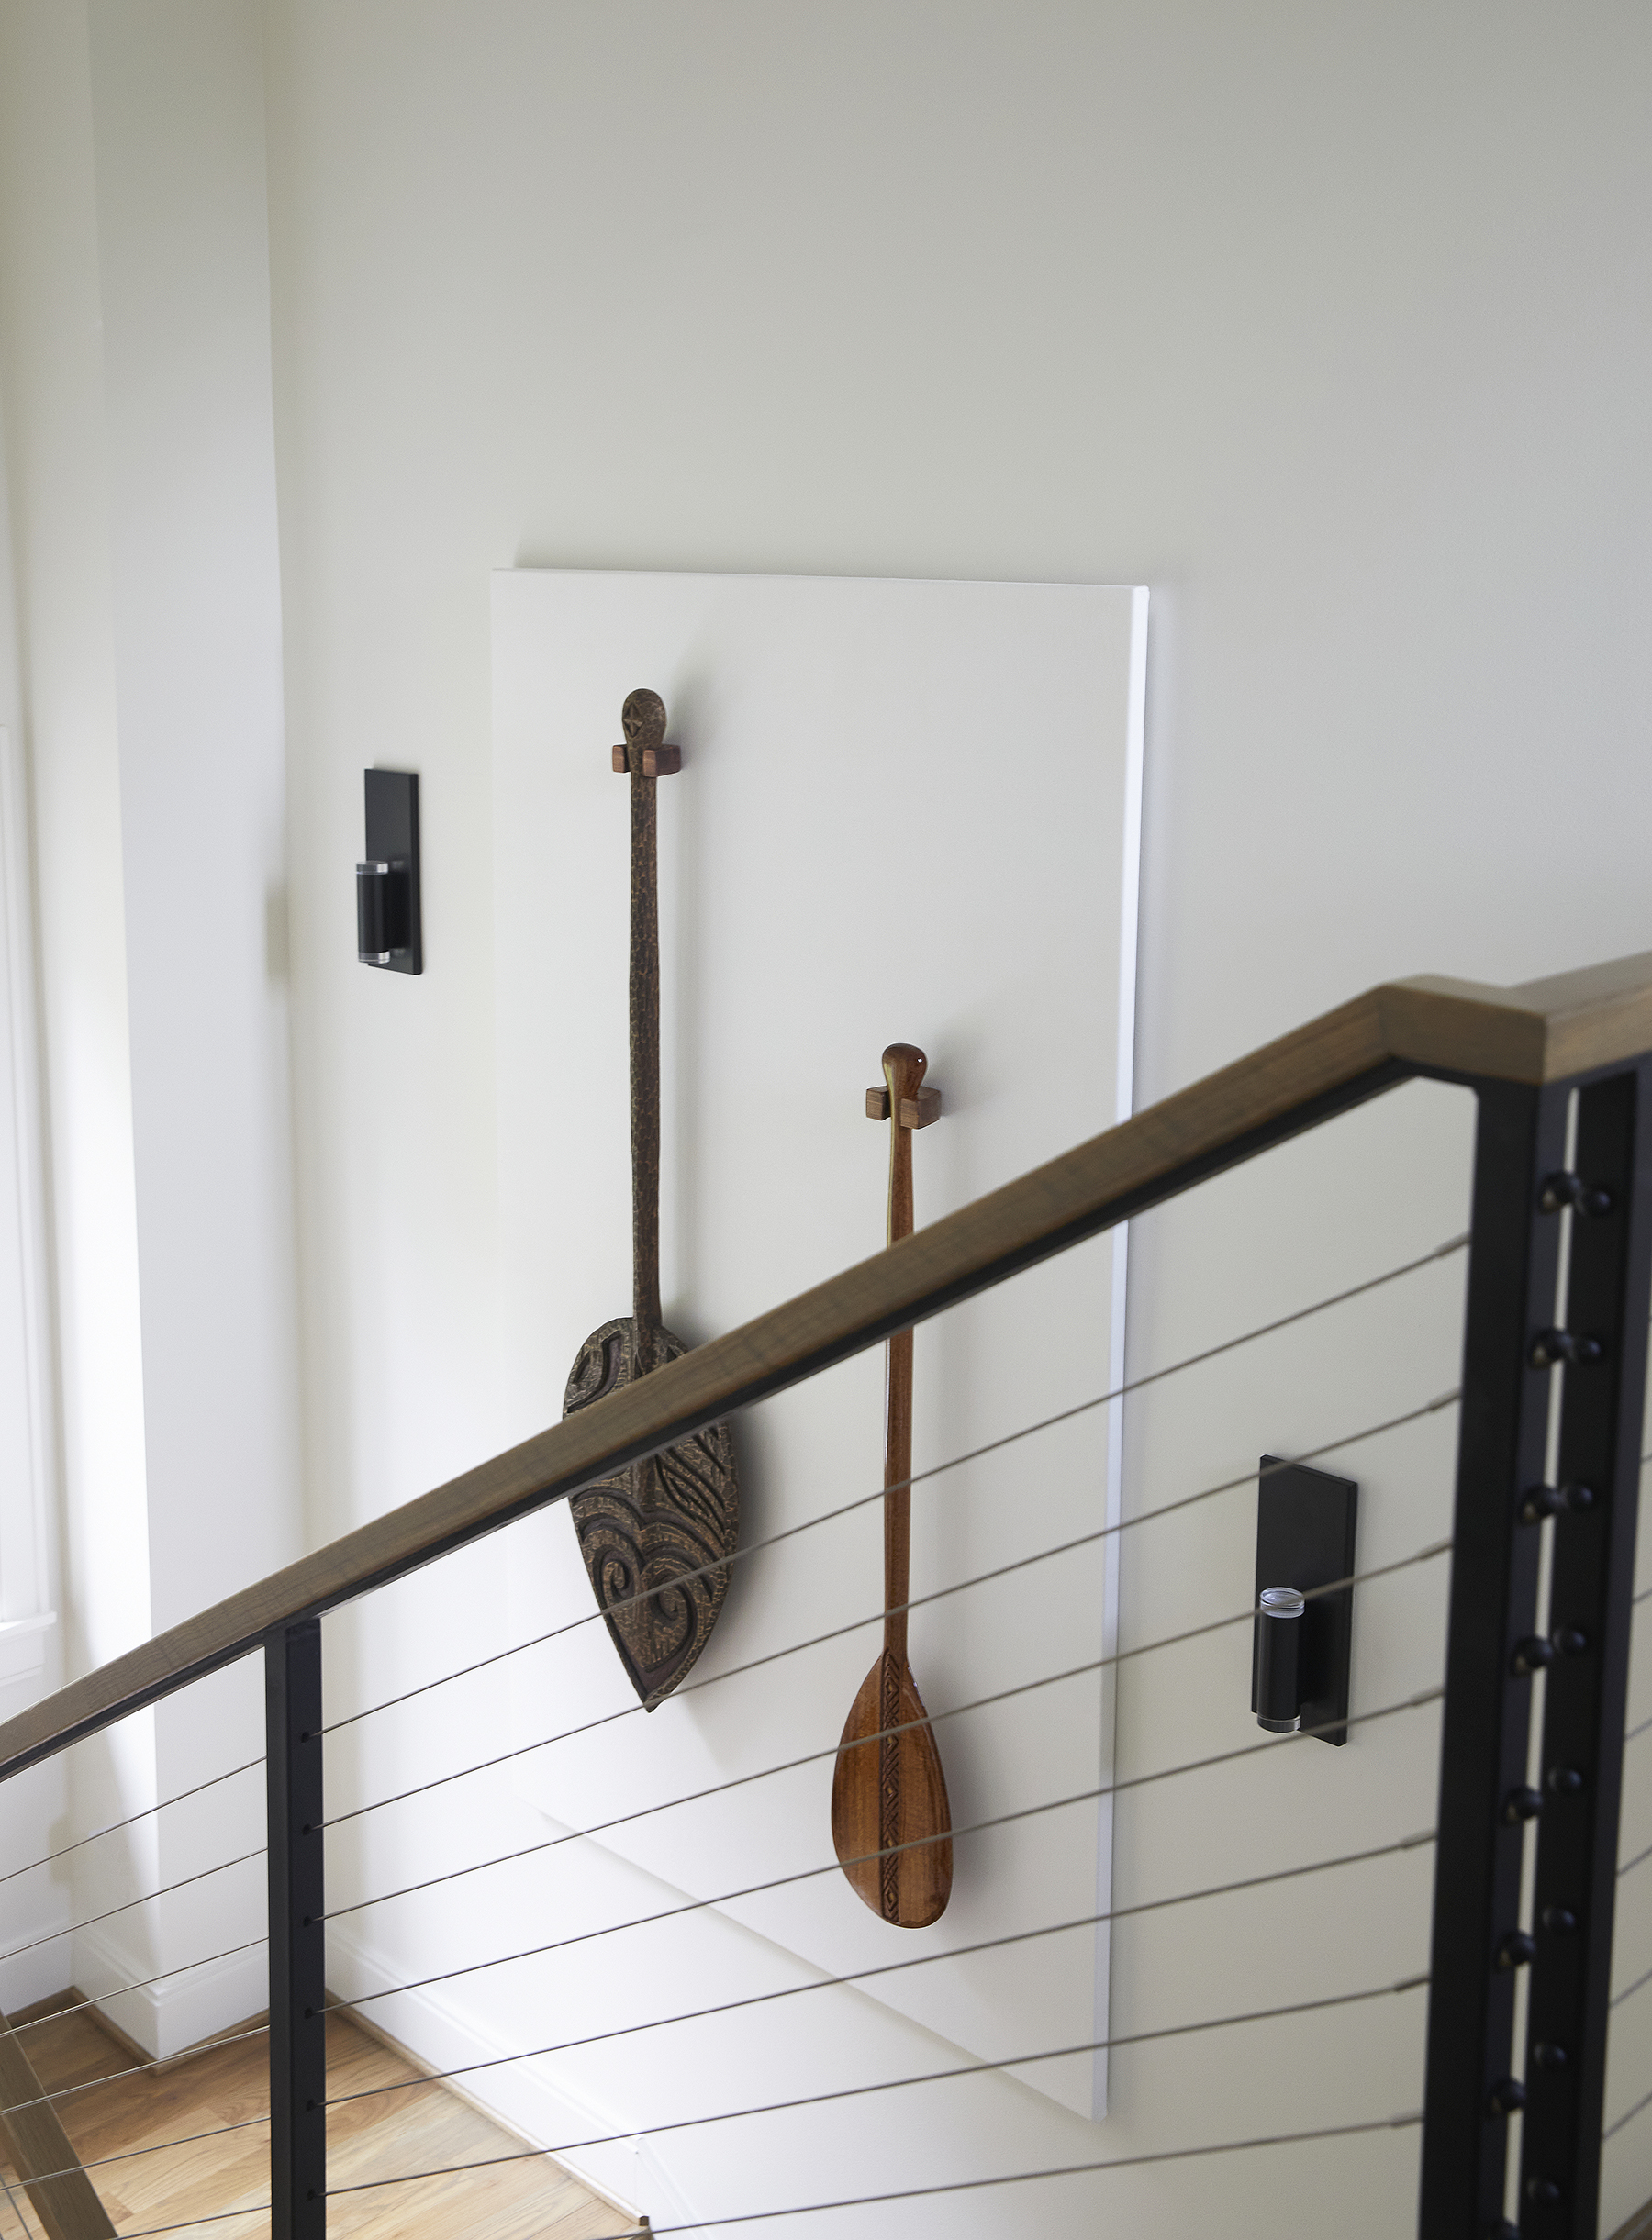 Two wooden artfully carved oars are hung on the wall next to the staircase